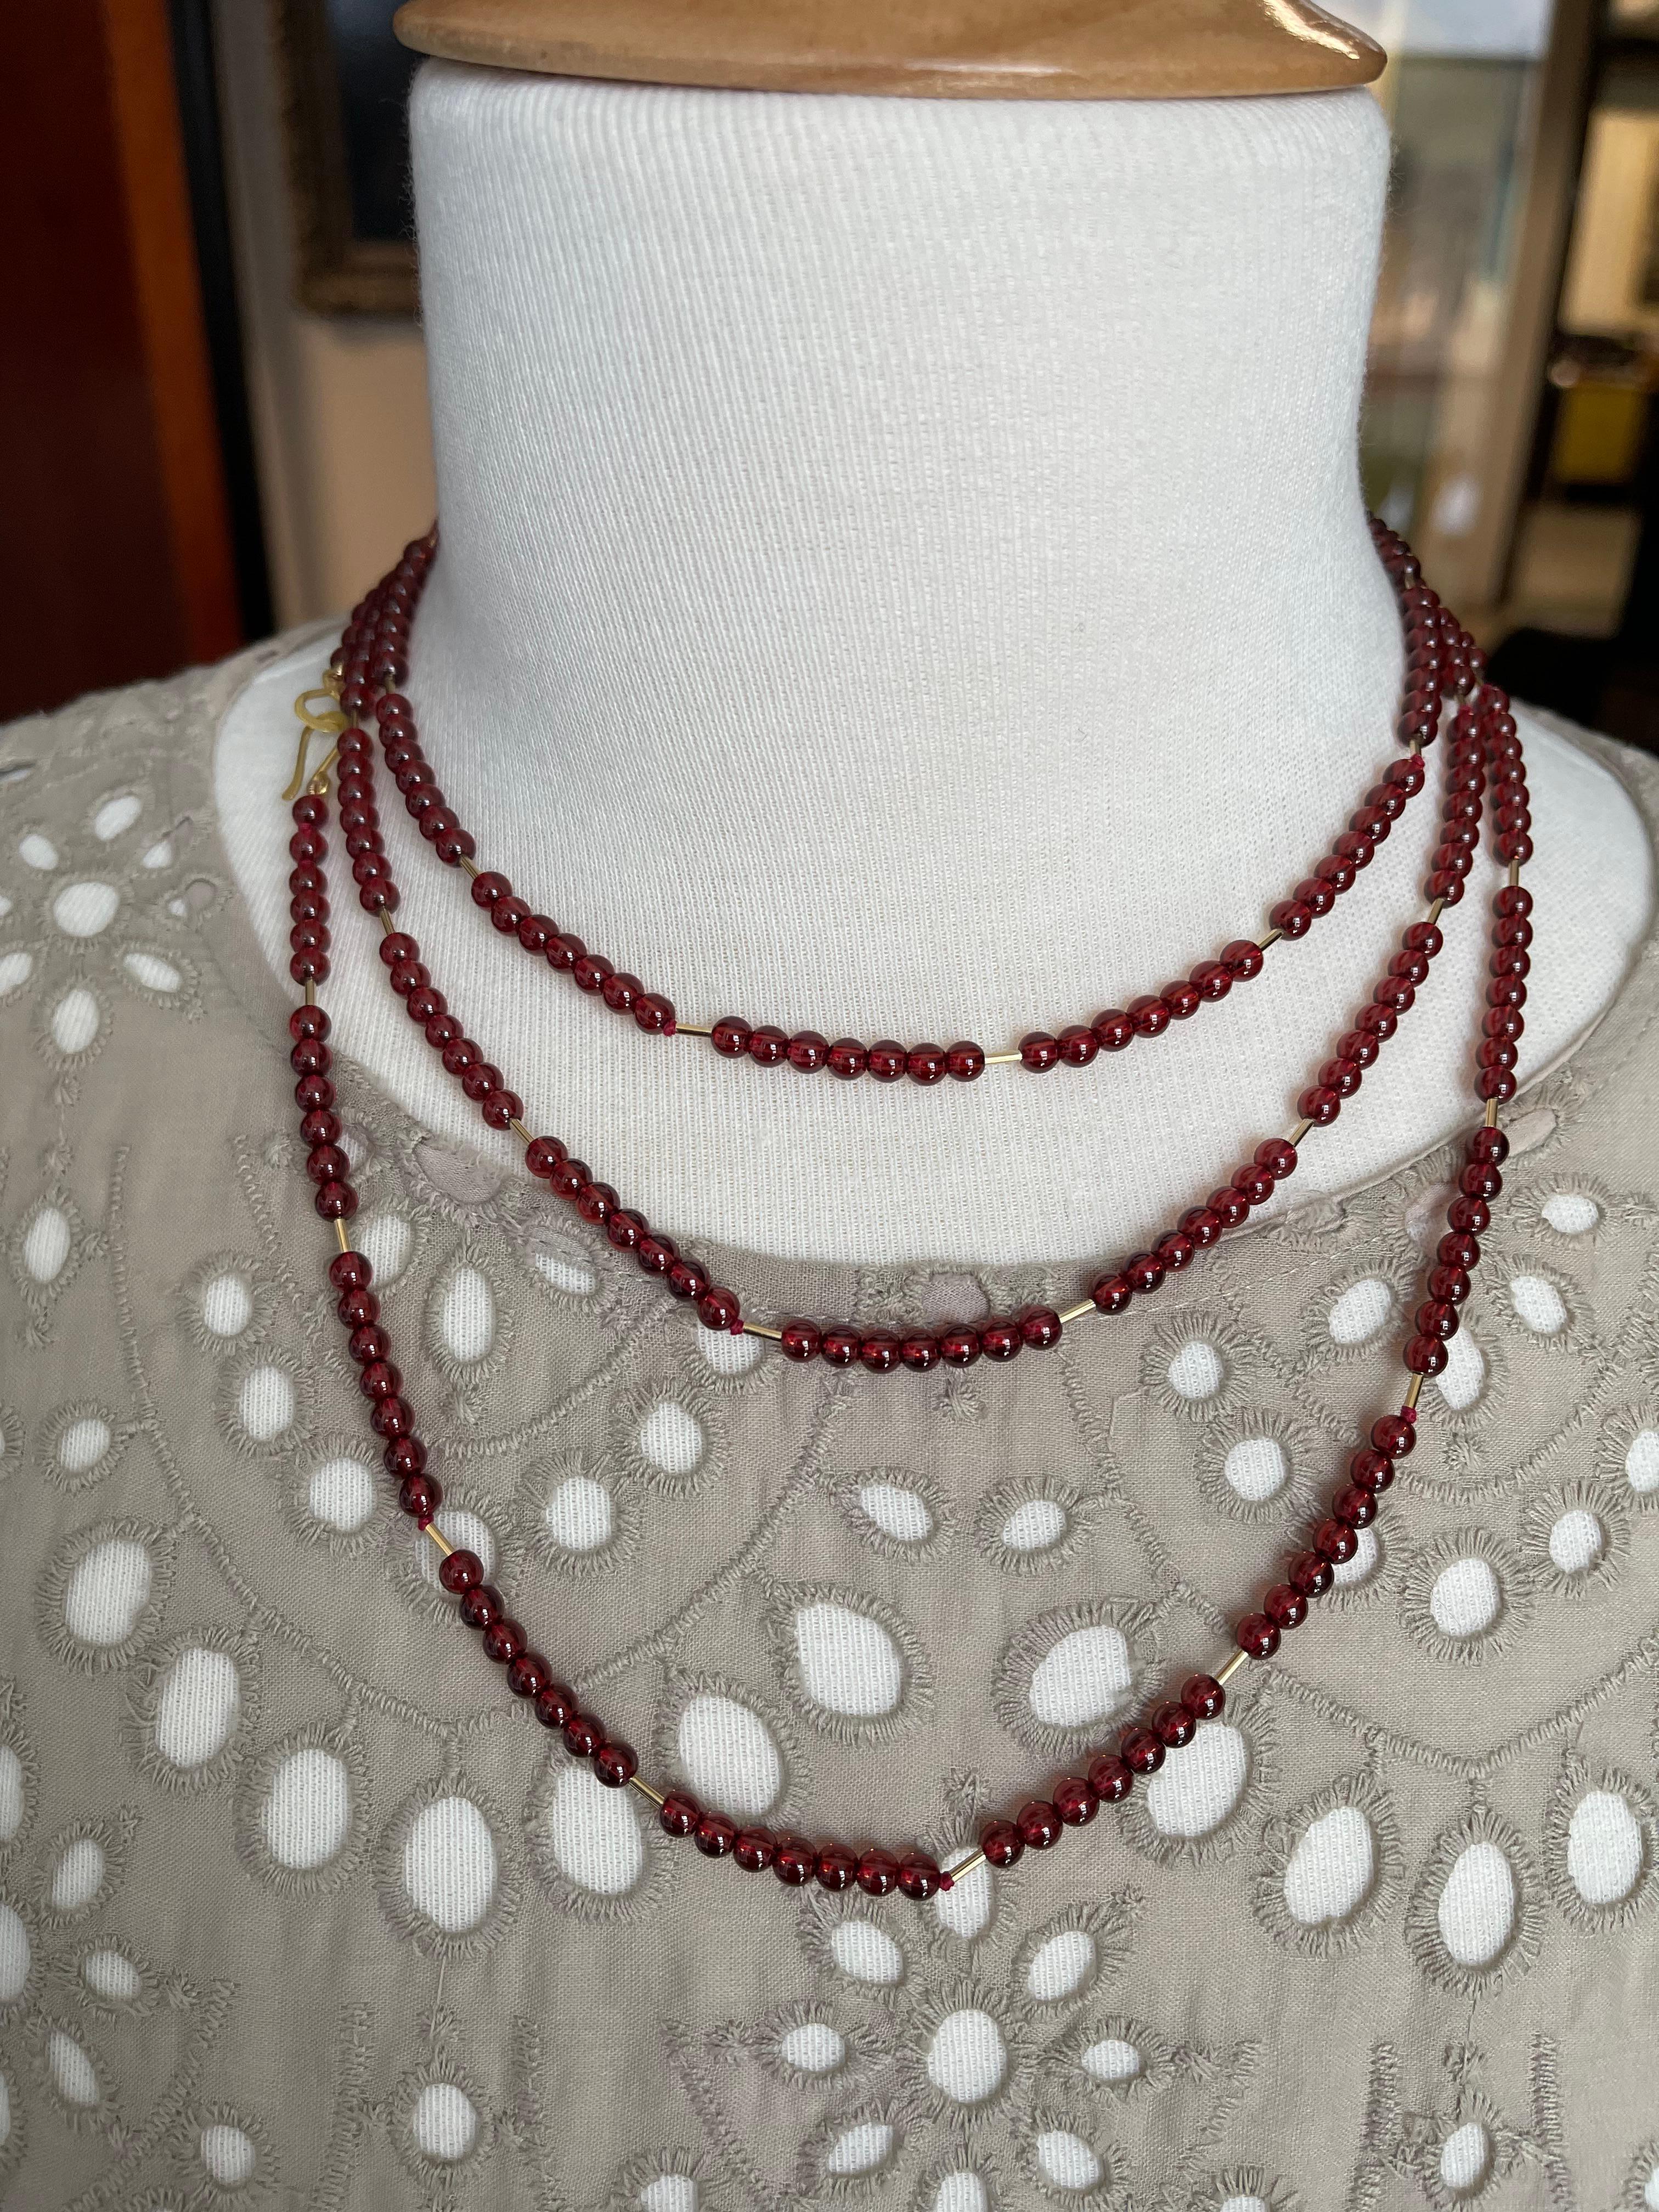 Women's or Men's Cranberry Garnet Rope Necklace with Yellow Gold Accents & Clasp, 54 Inches For Sale